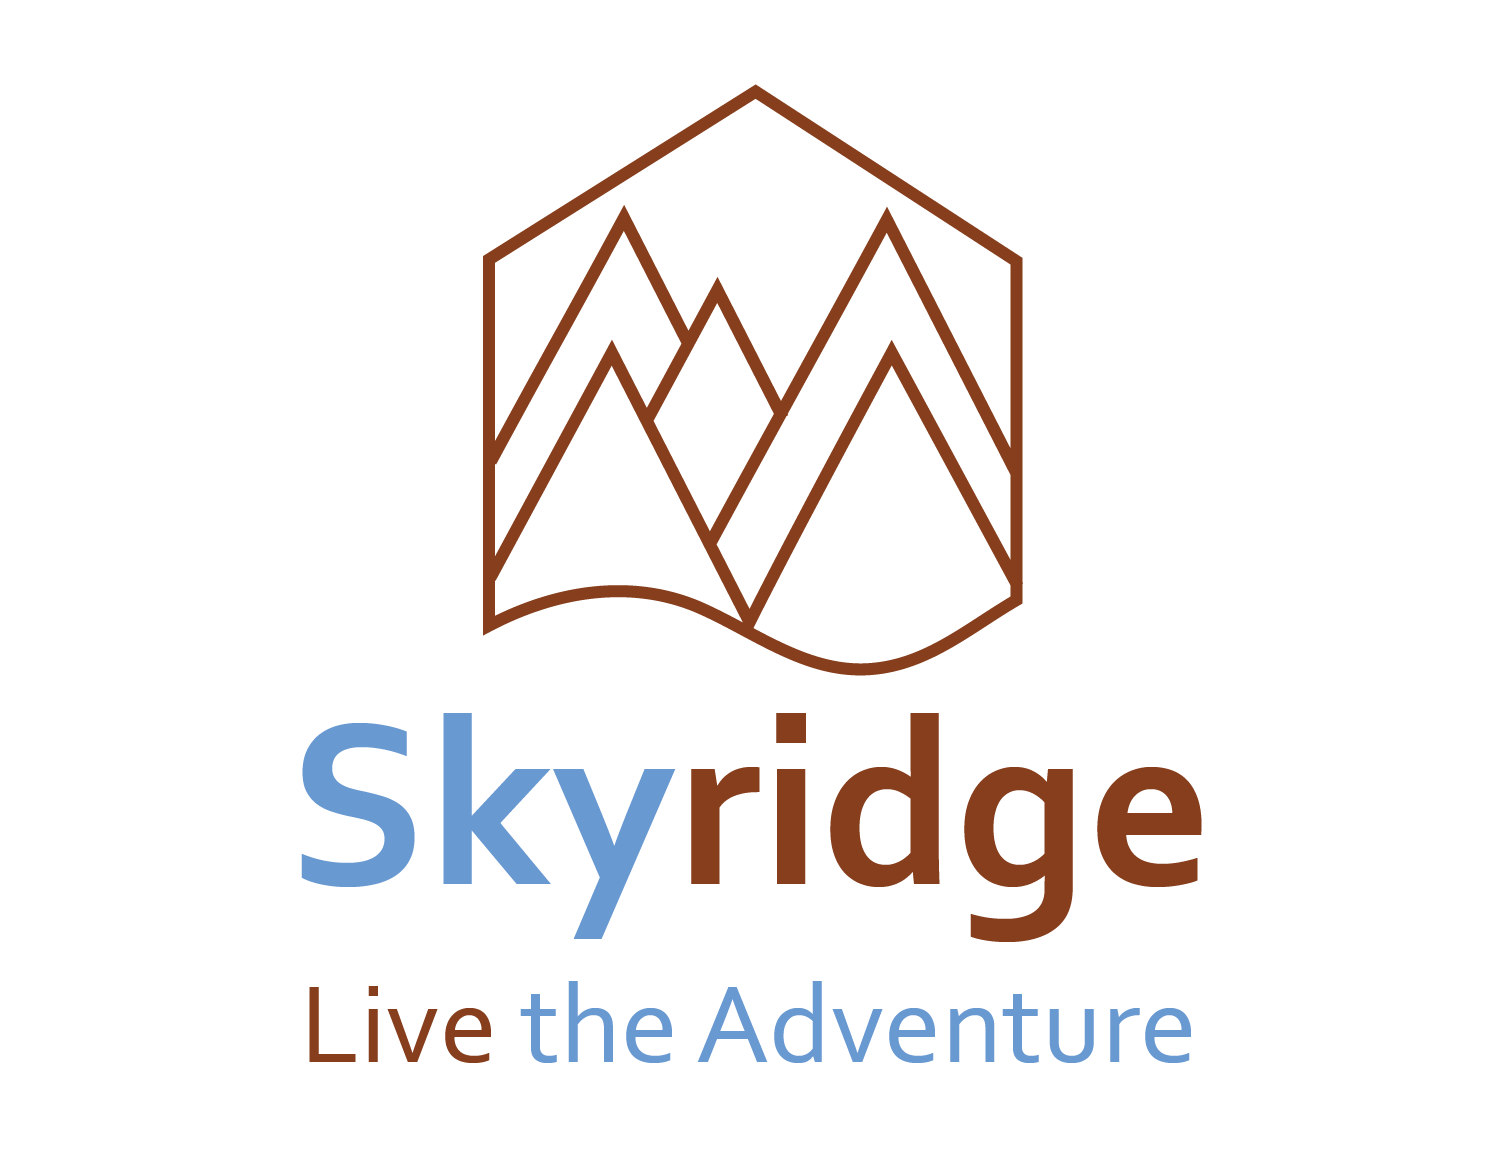 Skyridge Live the Adventure are the words this logo contains.
				Skyridge is the name, while Live the Adventure is the tagline. A sky 
				blue color is used on the letters Sky, the, and Adventure, while a reddish
				brown color is used on ridge, Live, and the icon above the rest of the logo.
				The icon contains five mountain outlines that are enclosed in an outline mostly
				shaped like a house. This house outline contains a curved line at the bottom
				of it. The words in this logo are written using a sans serif typeface.